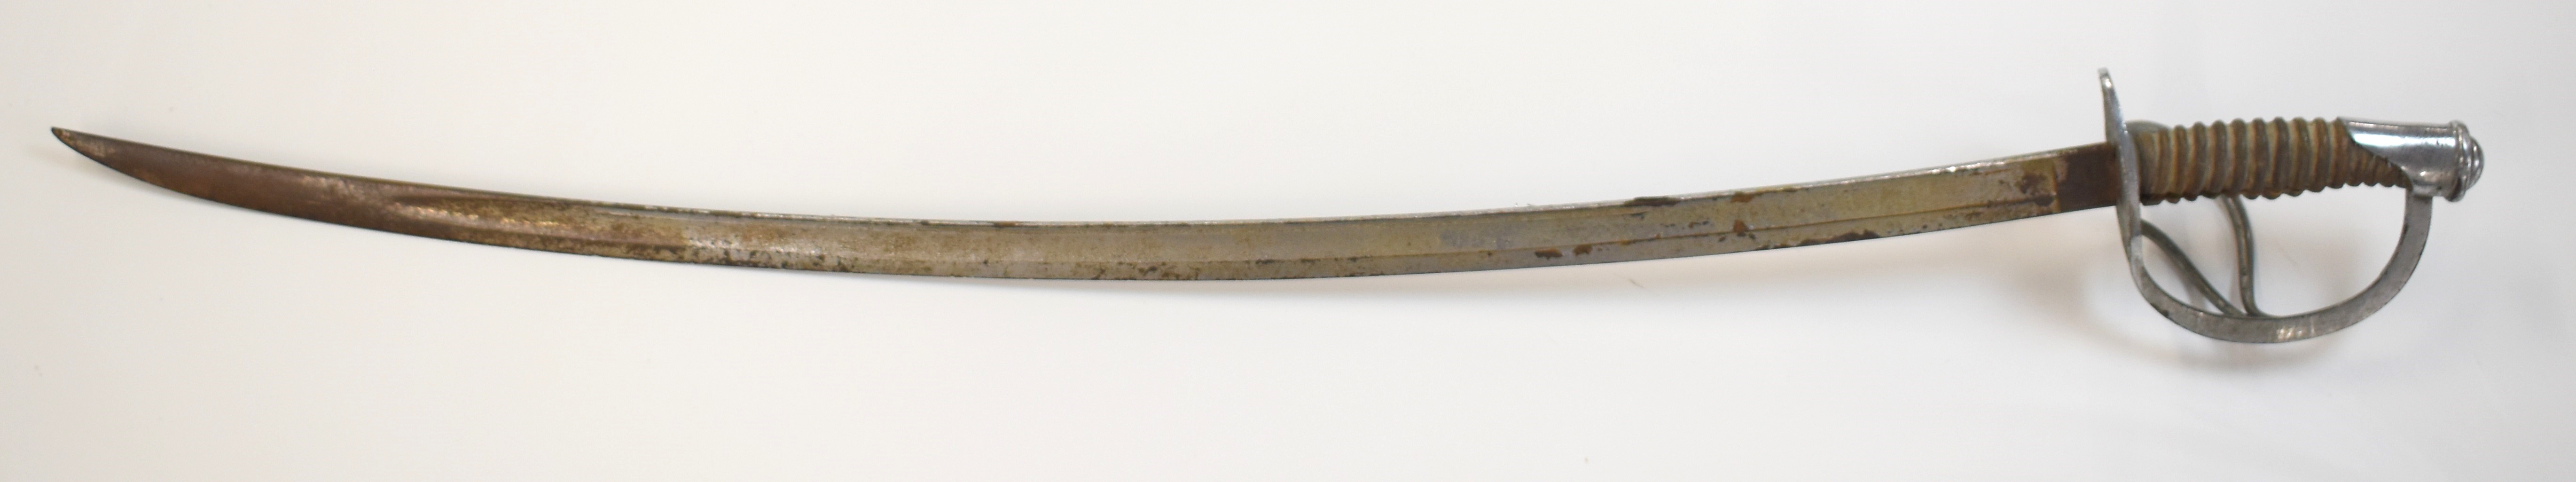 American Civil War sword with wooden grip, two bar hilt, US 1864 AGM to ricasso and Crosby - Image 10 of 26